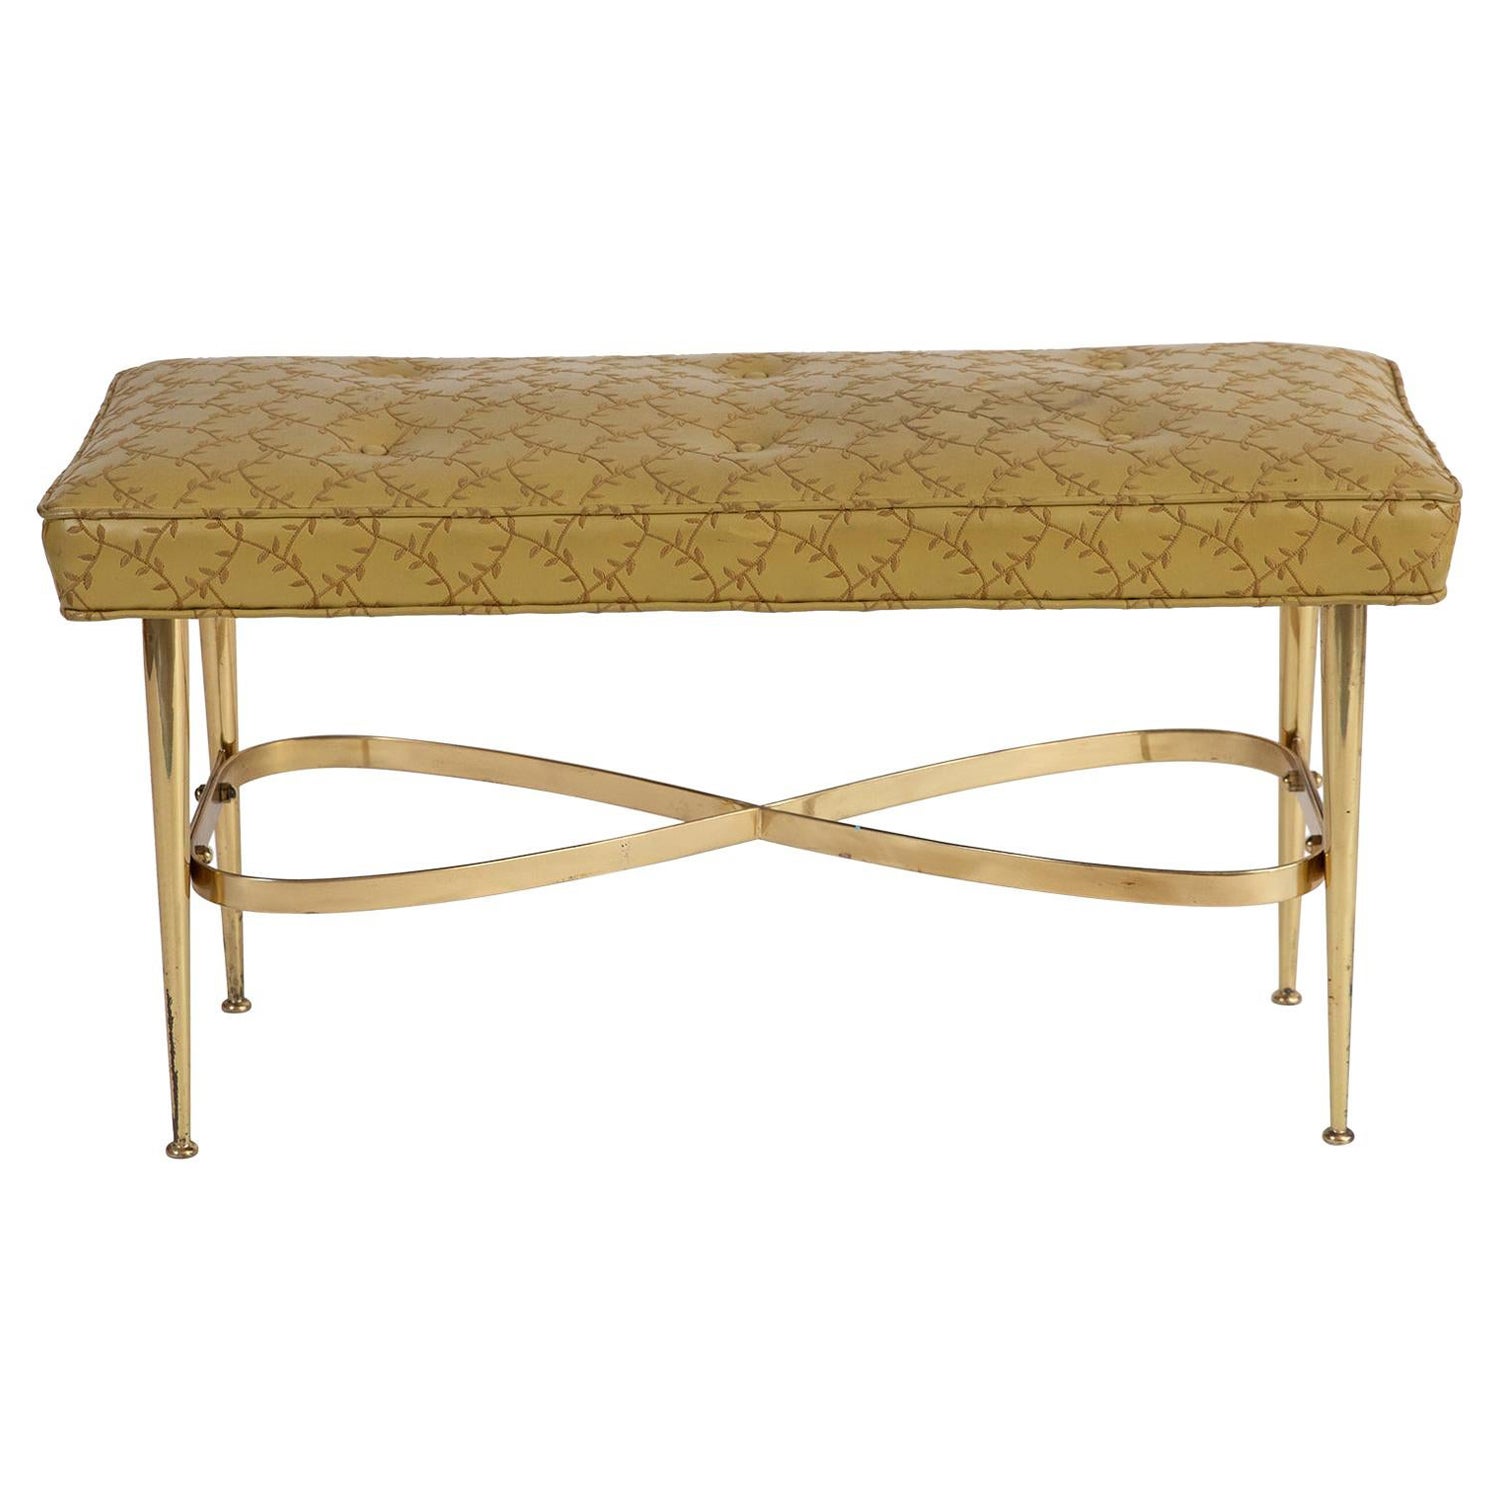 Italian Bench in Brass and Original Yellow Upholstery